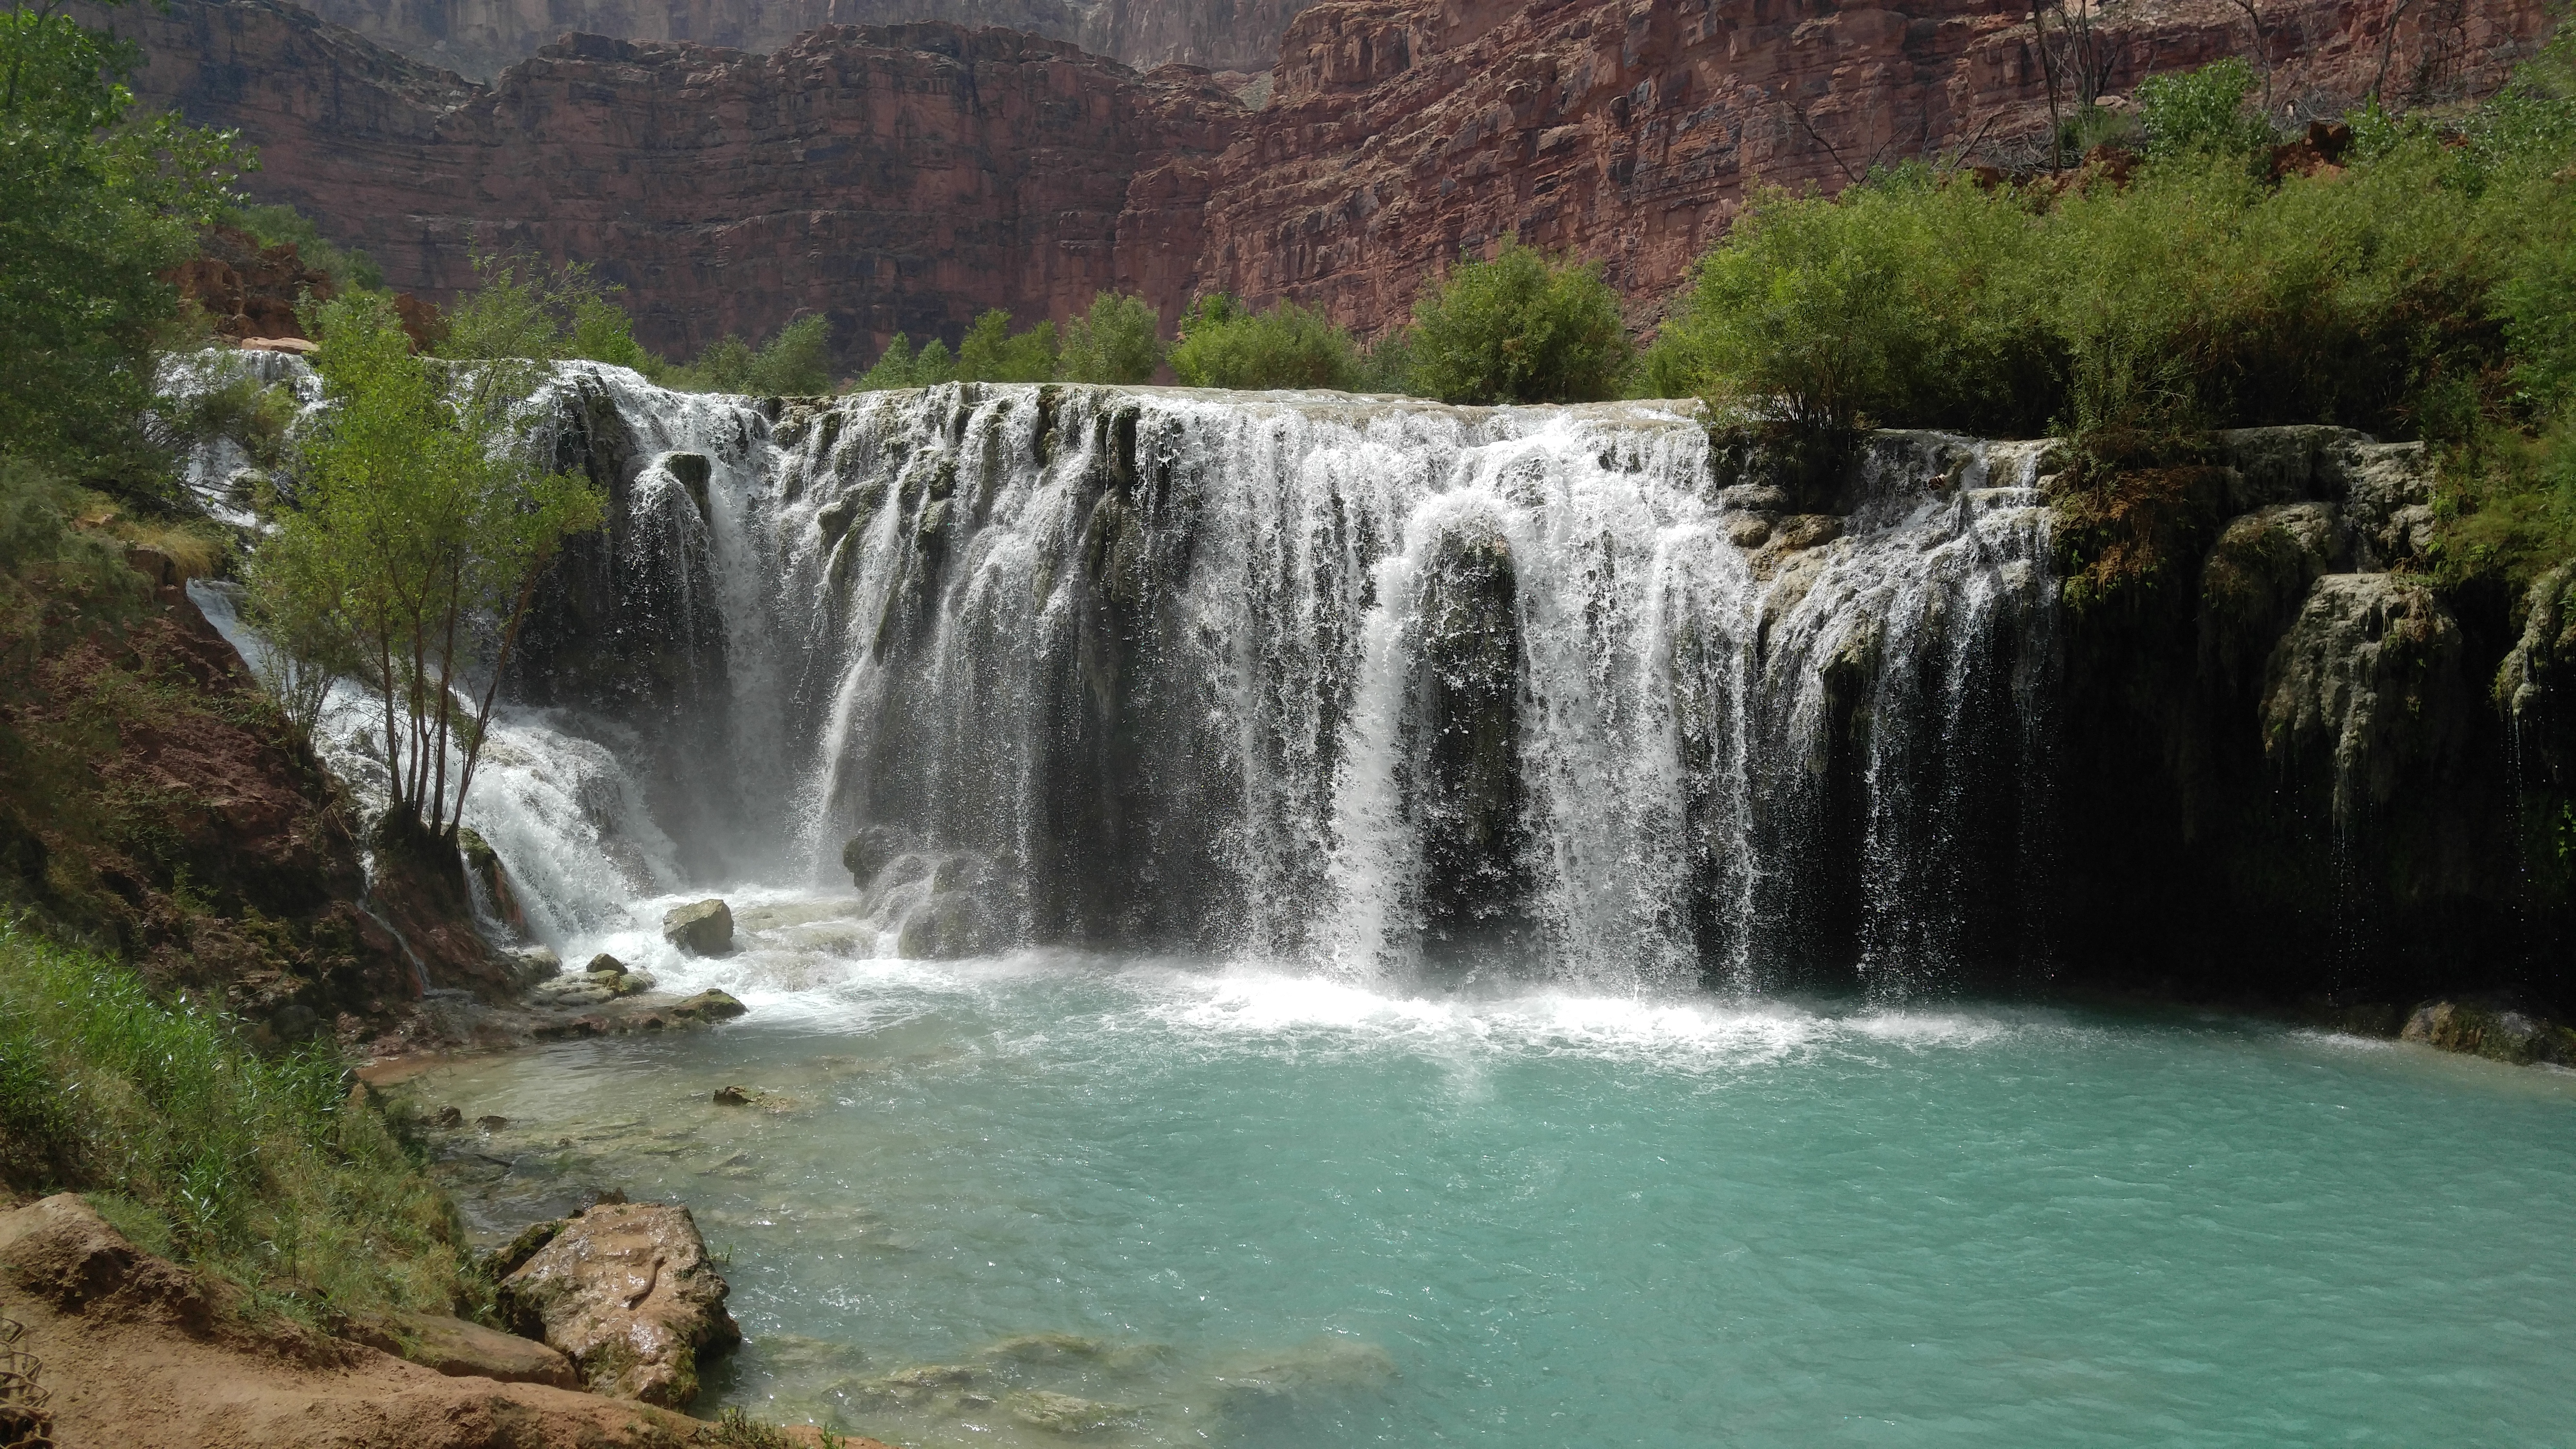  View of a small waterfall along Havasu Creek in the Grand Canyon 